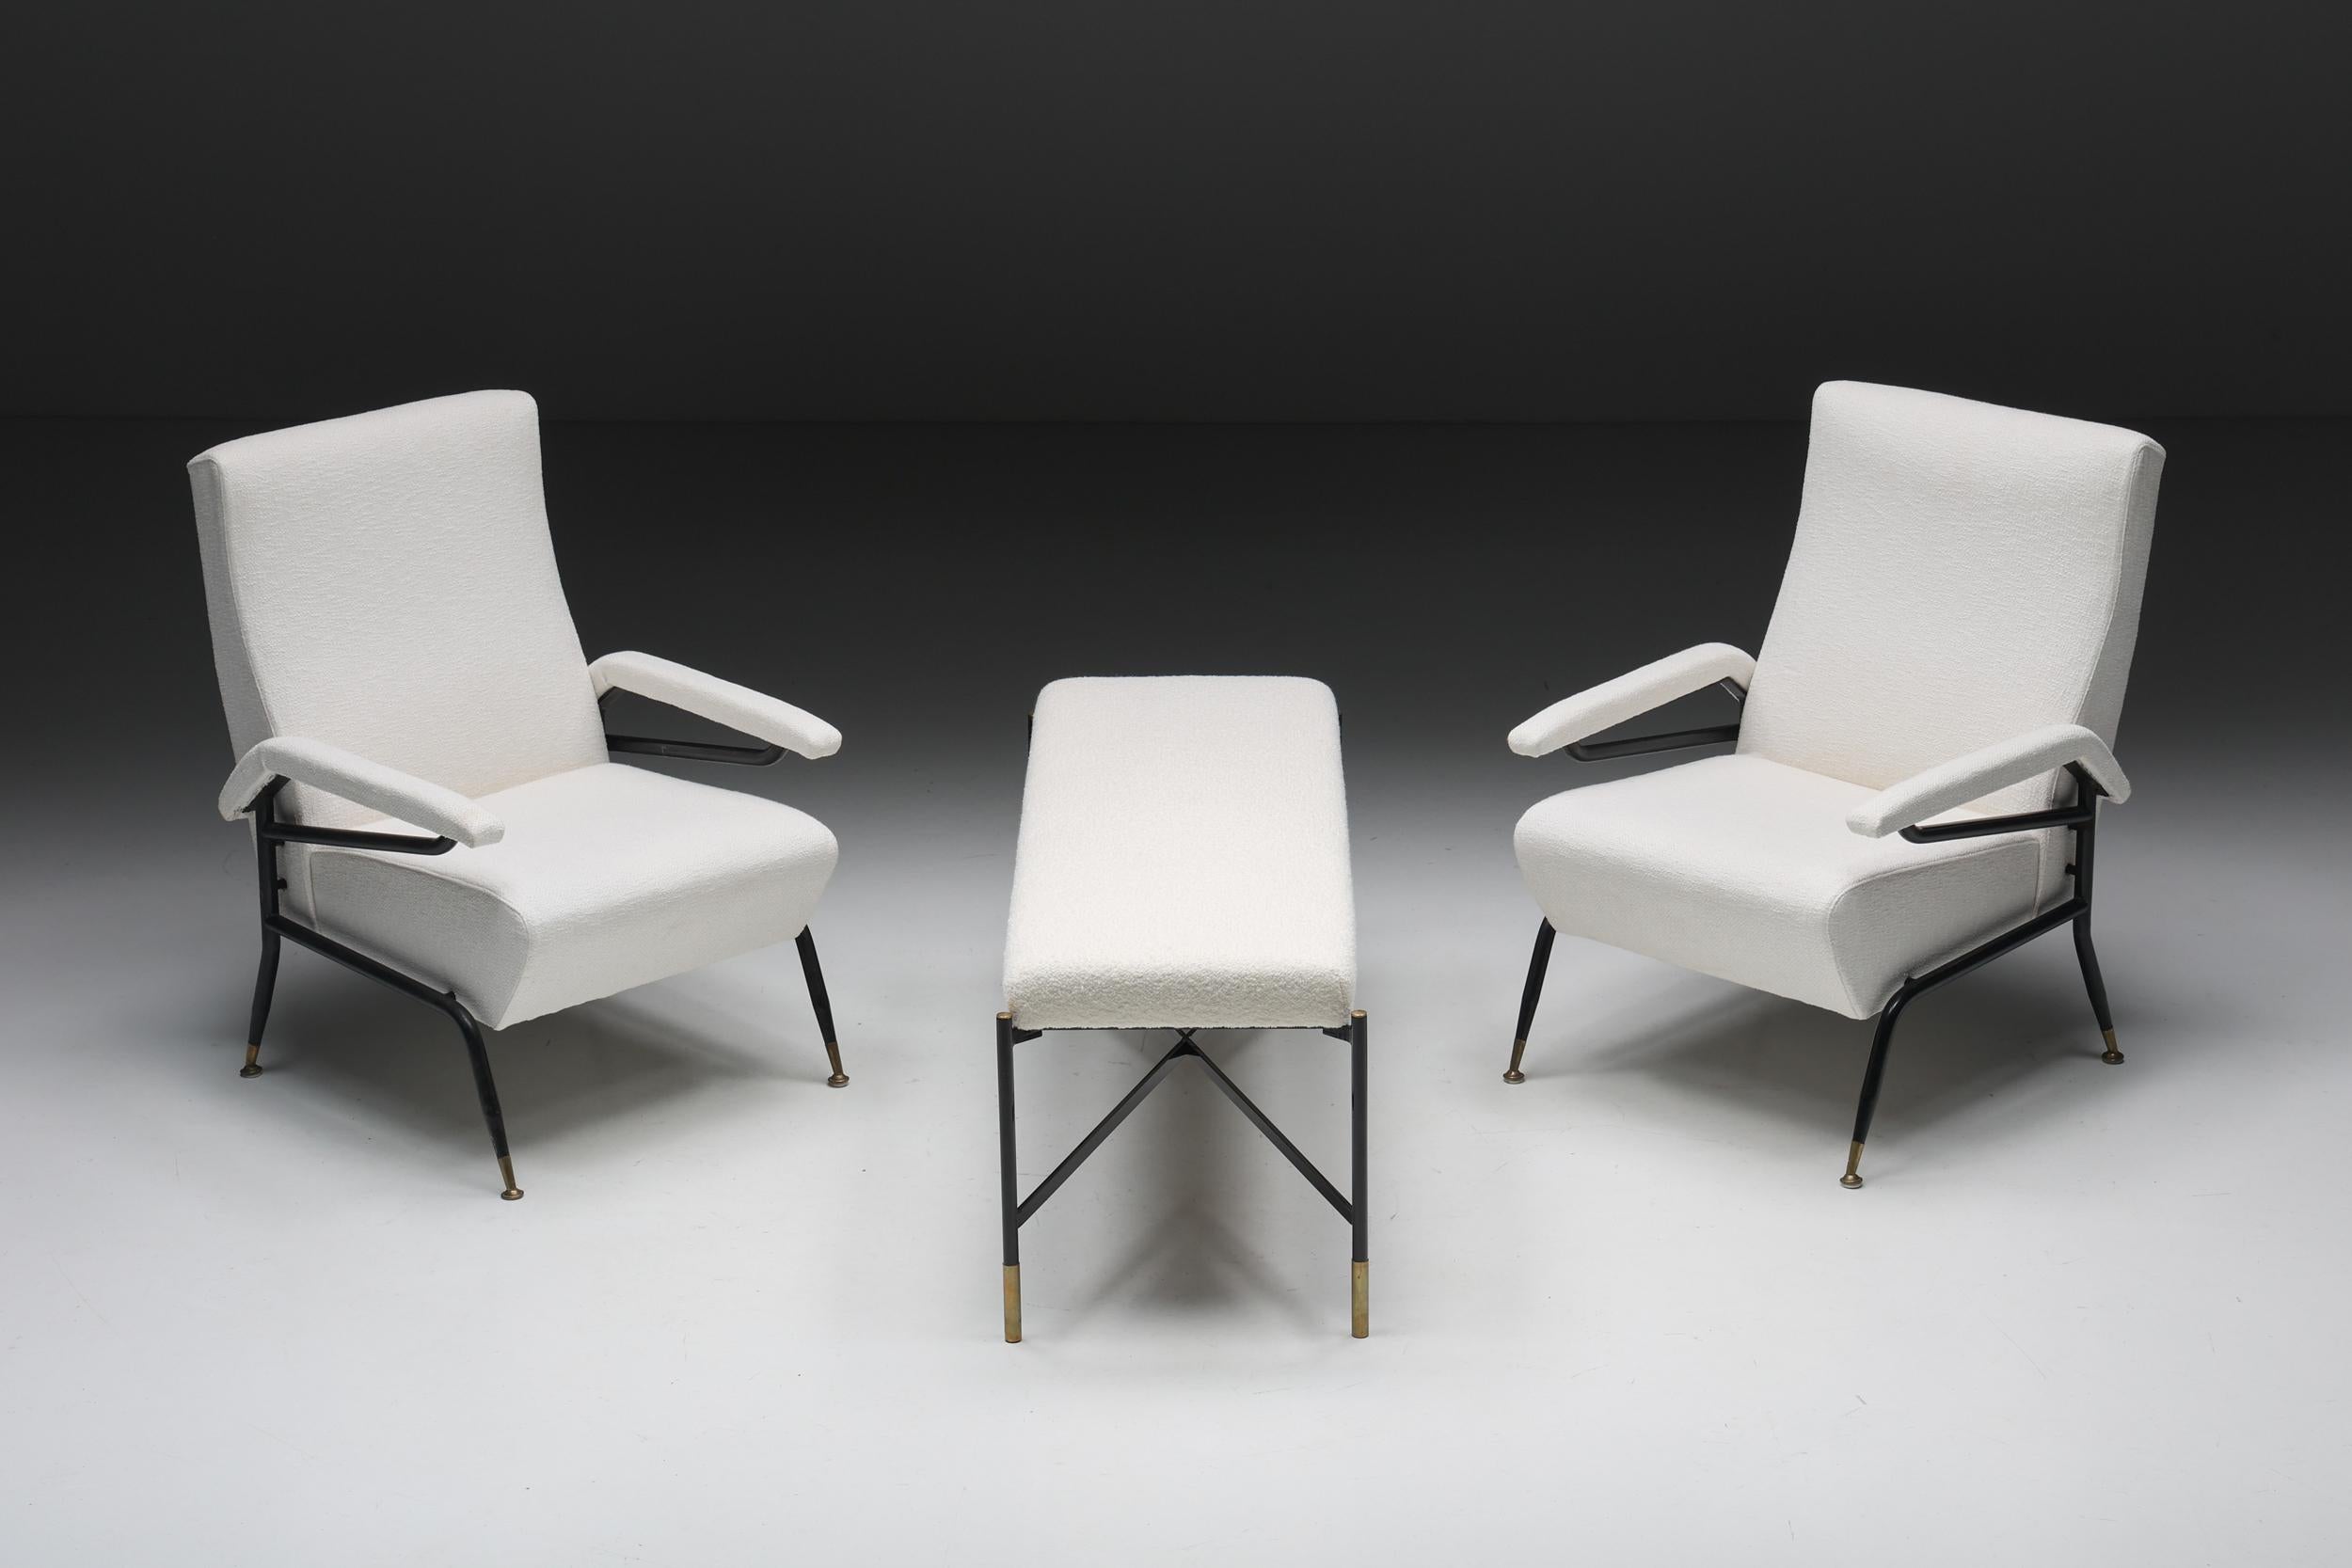 Late 20th Century Wim Rietveld Inspired Armchairs in Off-White Upholstery, Italy, 1970s For Sale